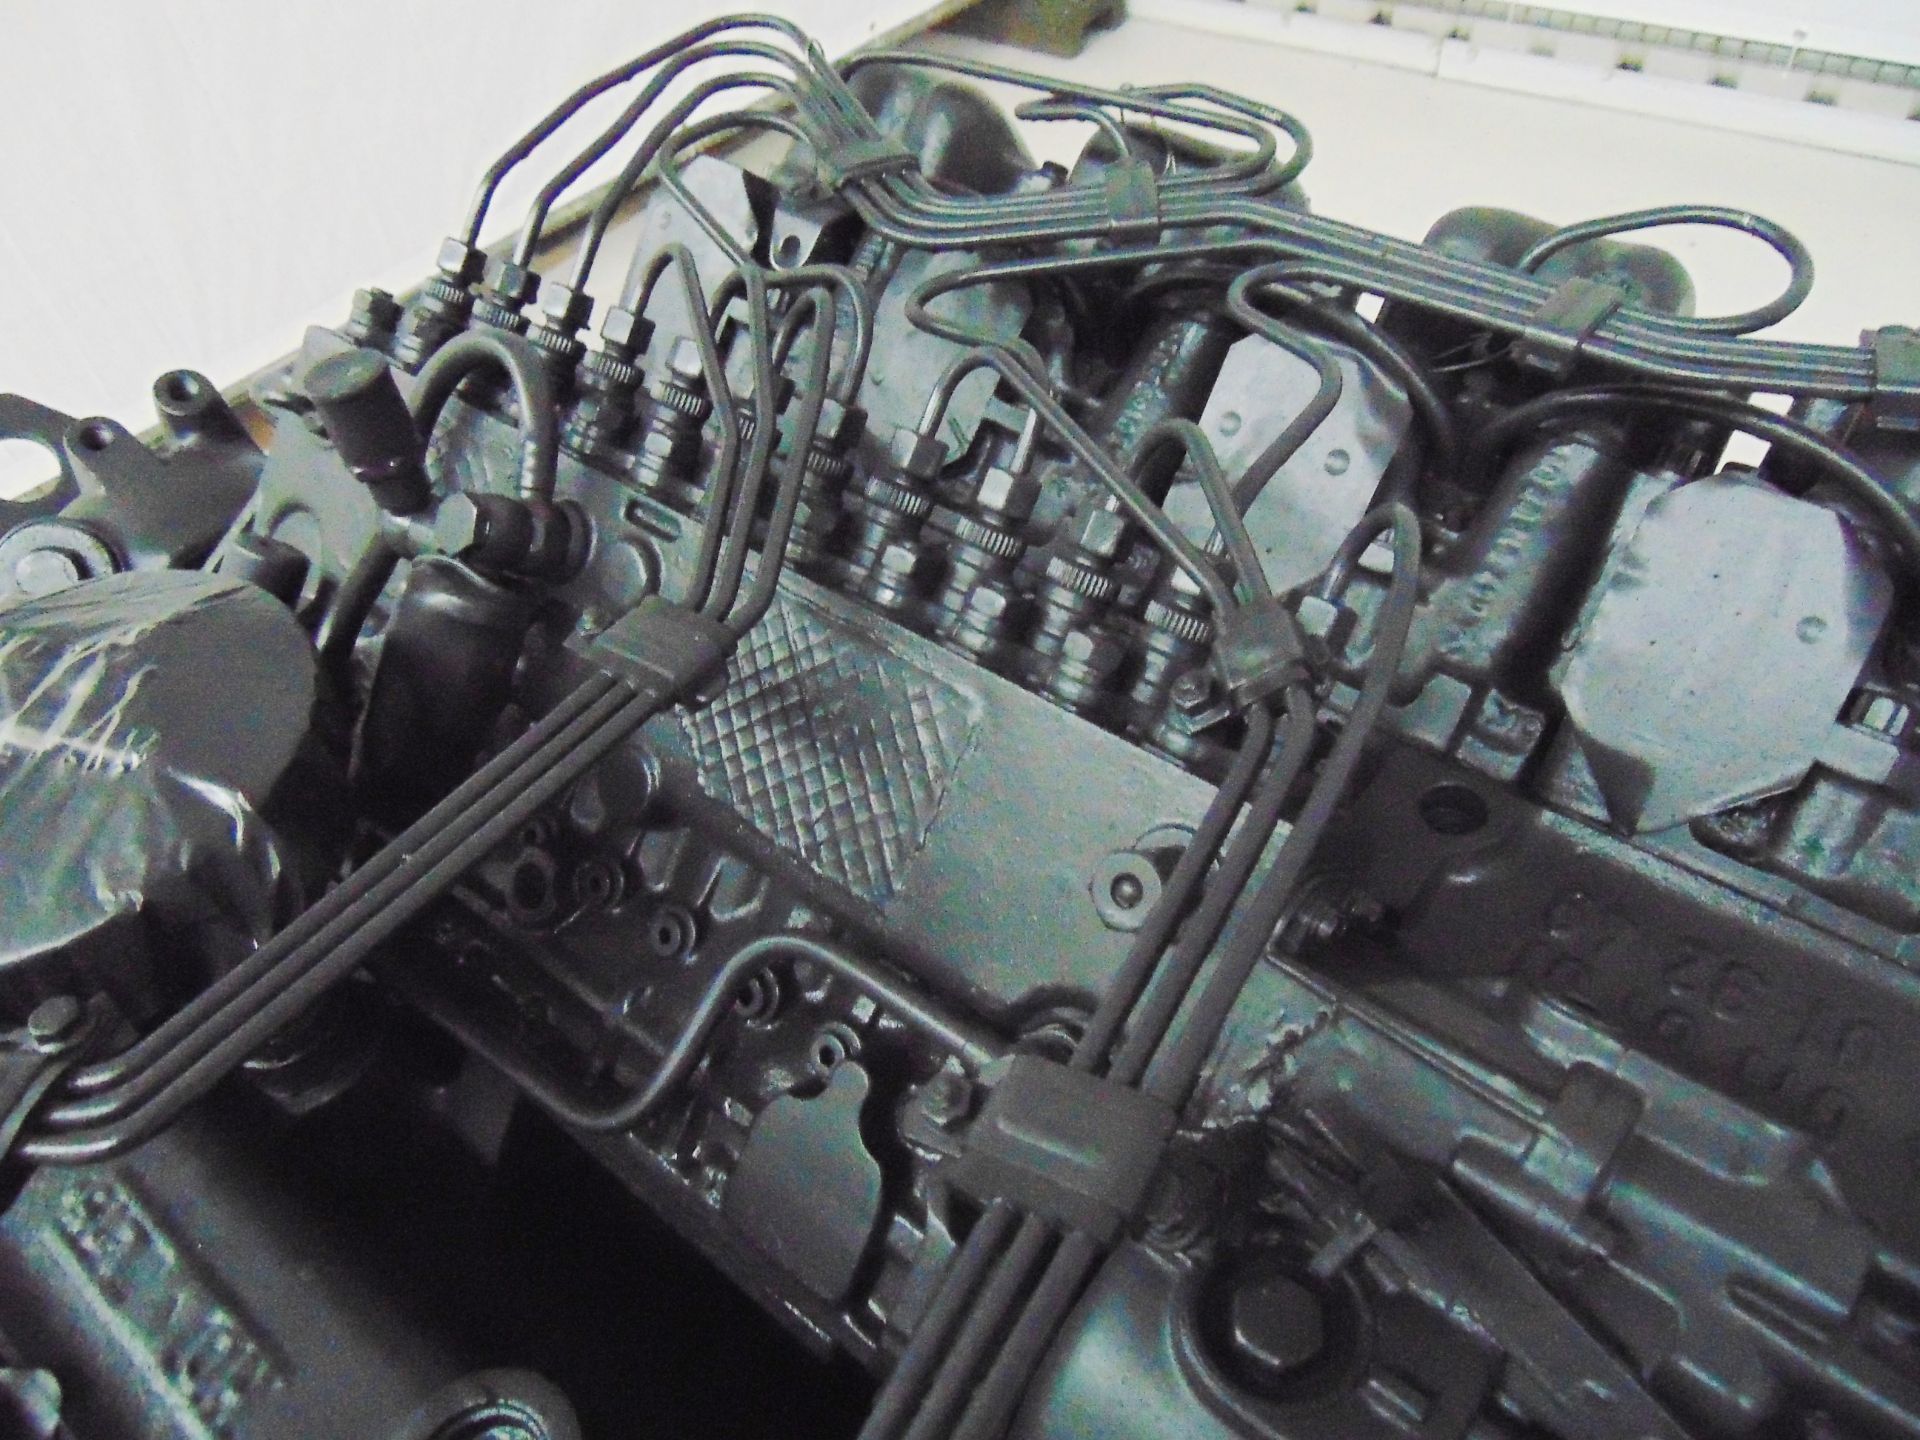 Factory Reconditioned Mercedes-Benz OM424 V12 Turbo Diesel Engine - Image 5 of 34